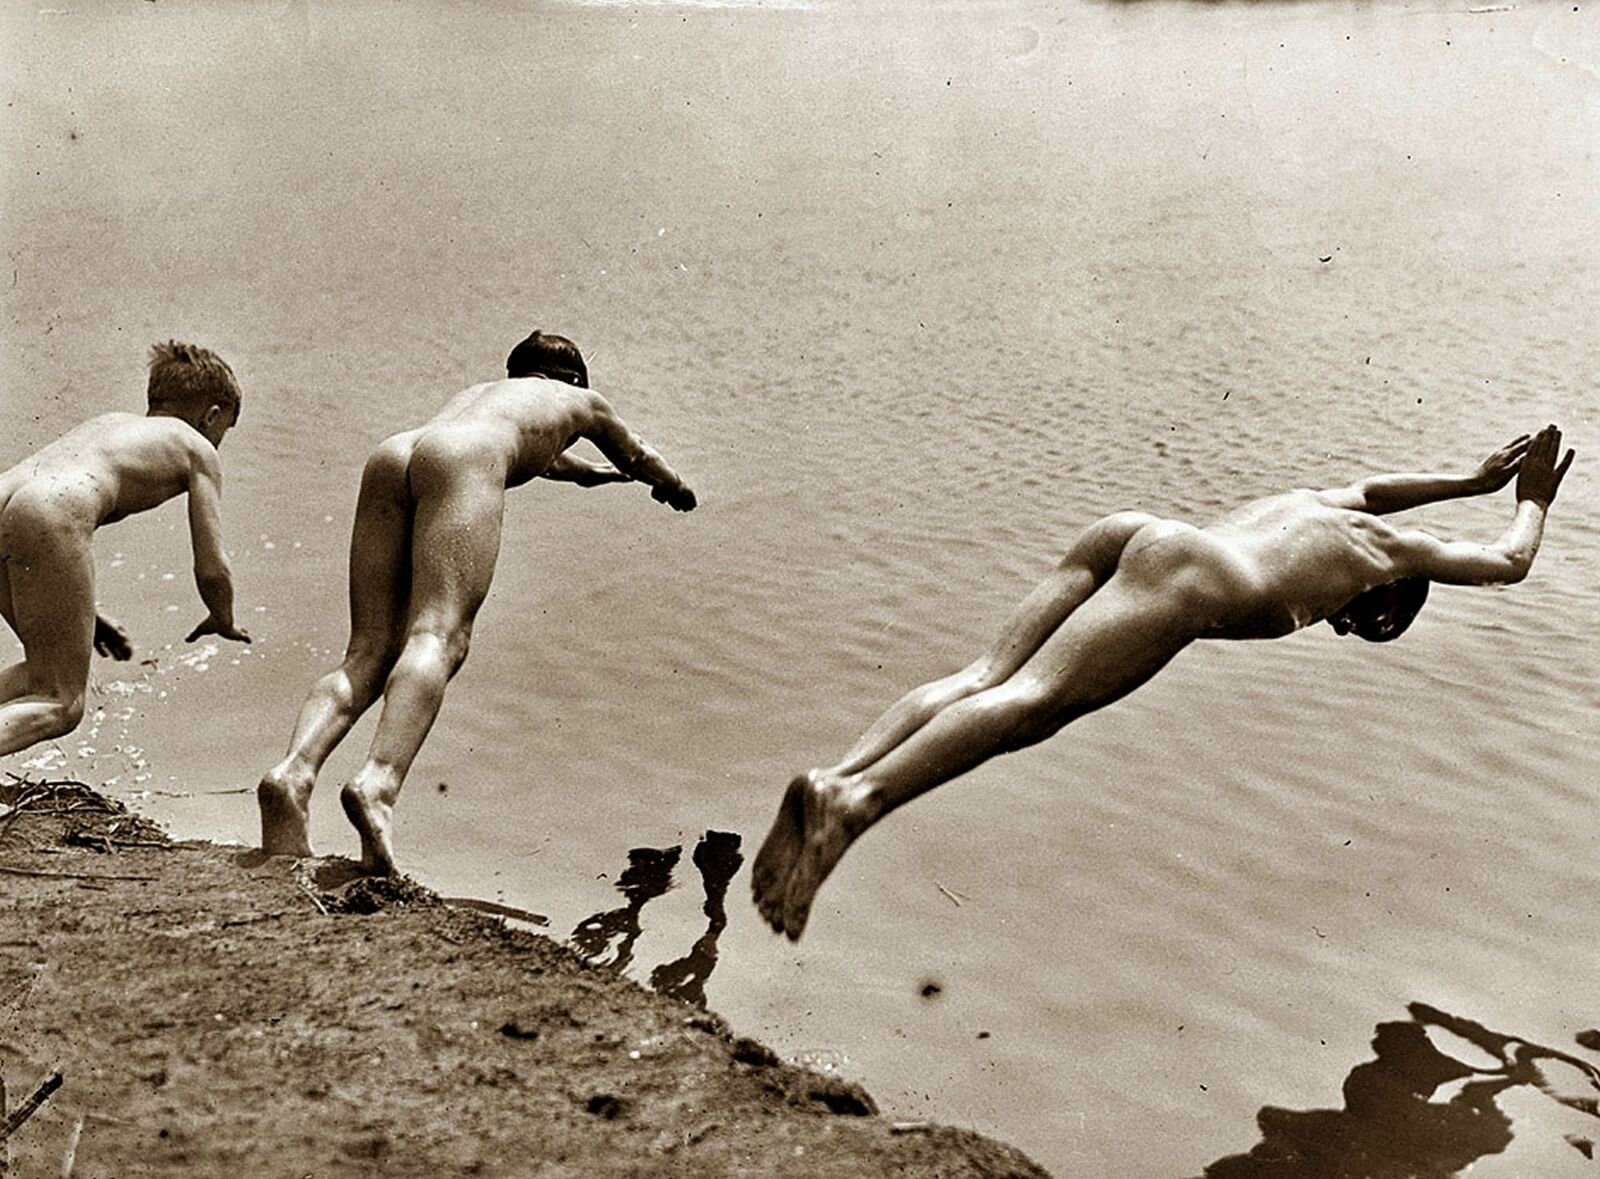 1934 Swimming Hole Skinny Dippers Photo (166-r)